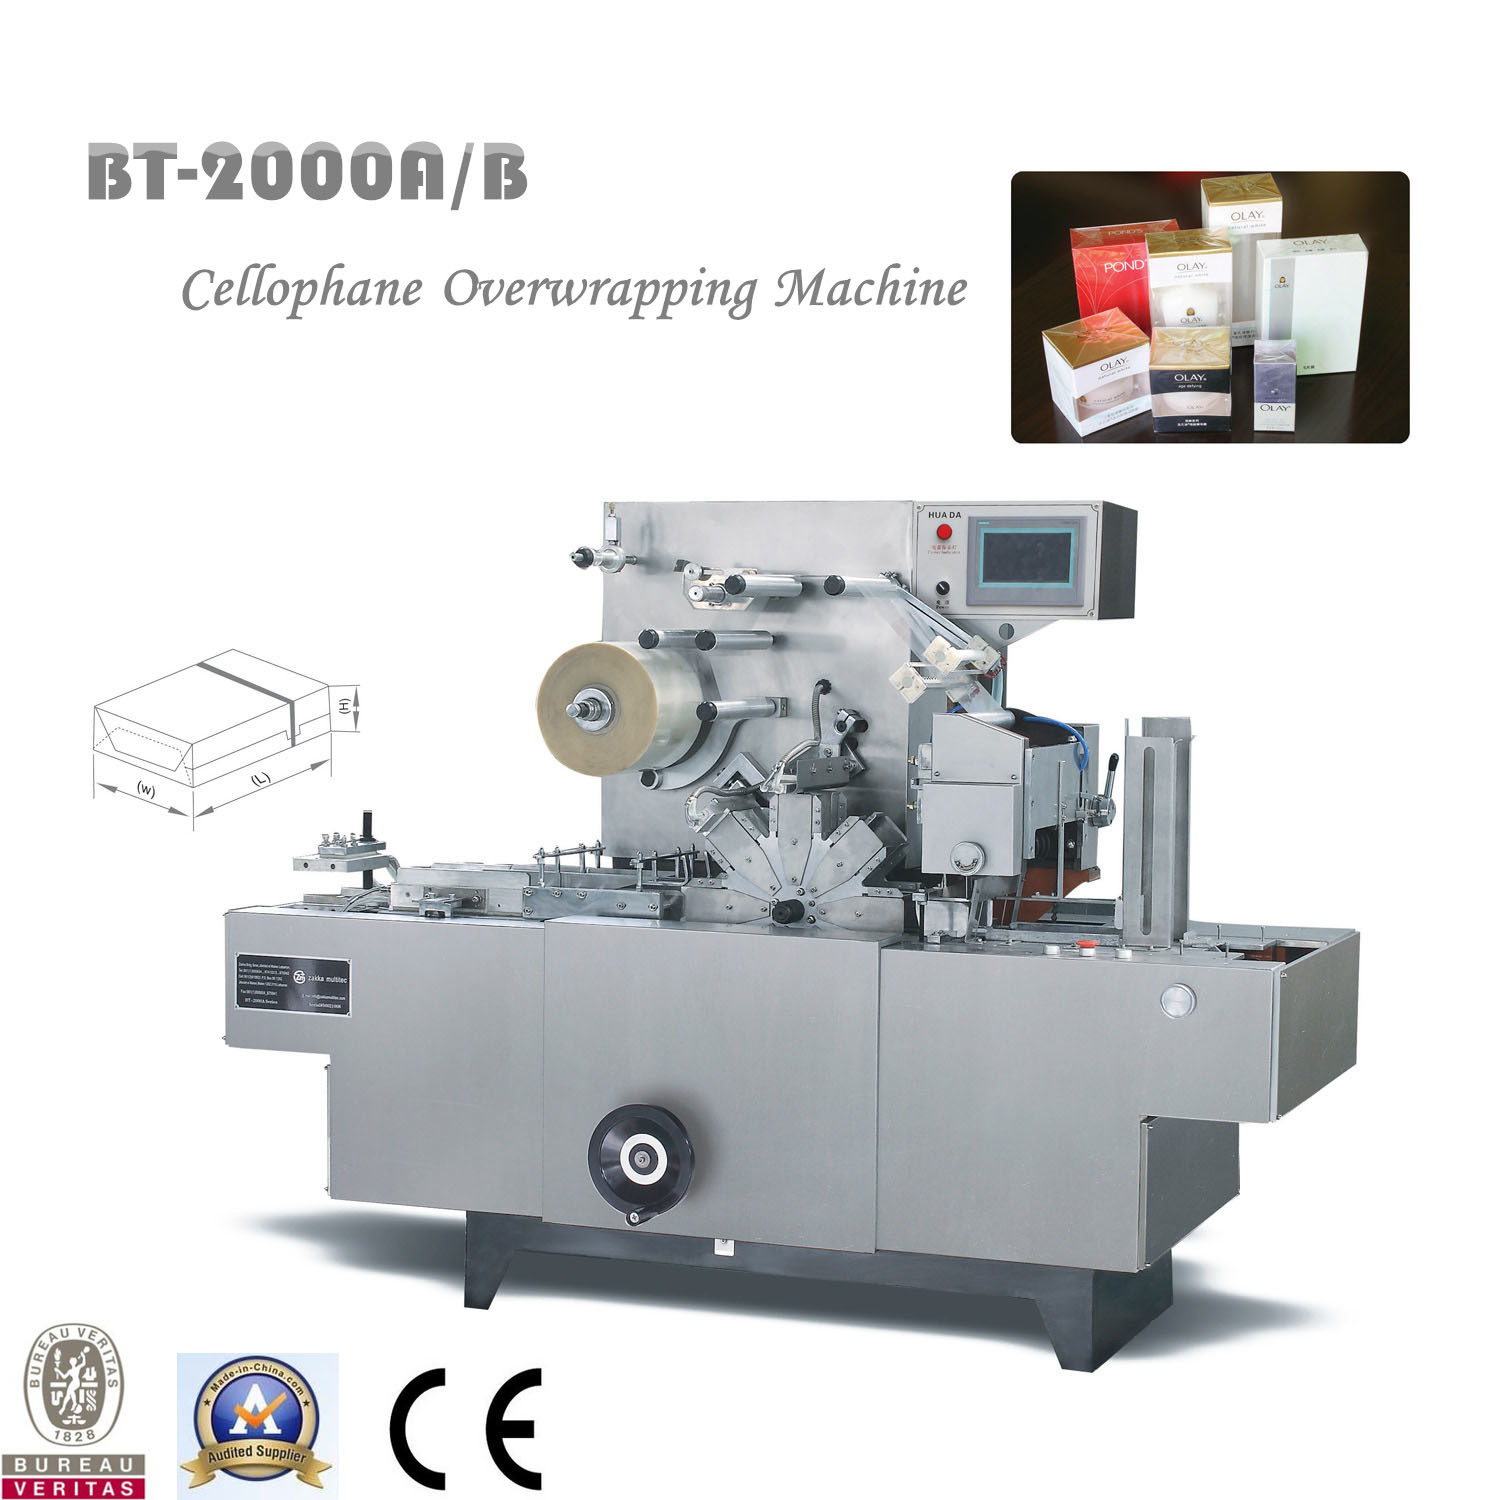 Cosmetics Box, Stationery BOPP Cellophane Overwrapping Machinery